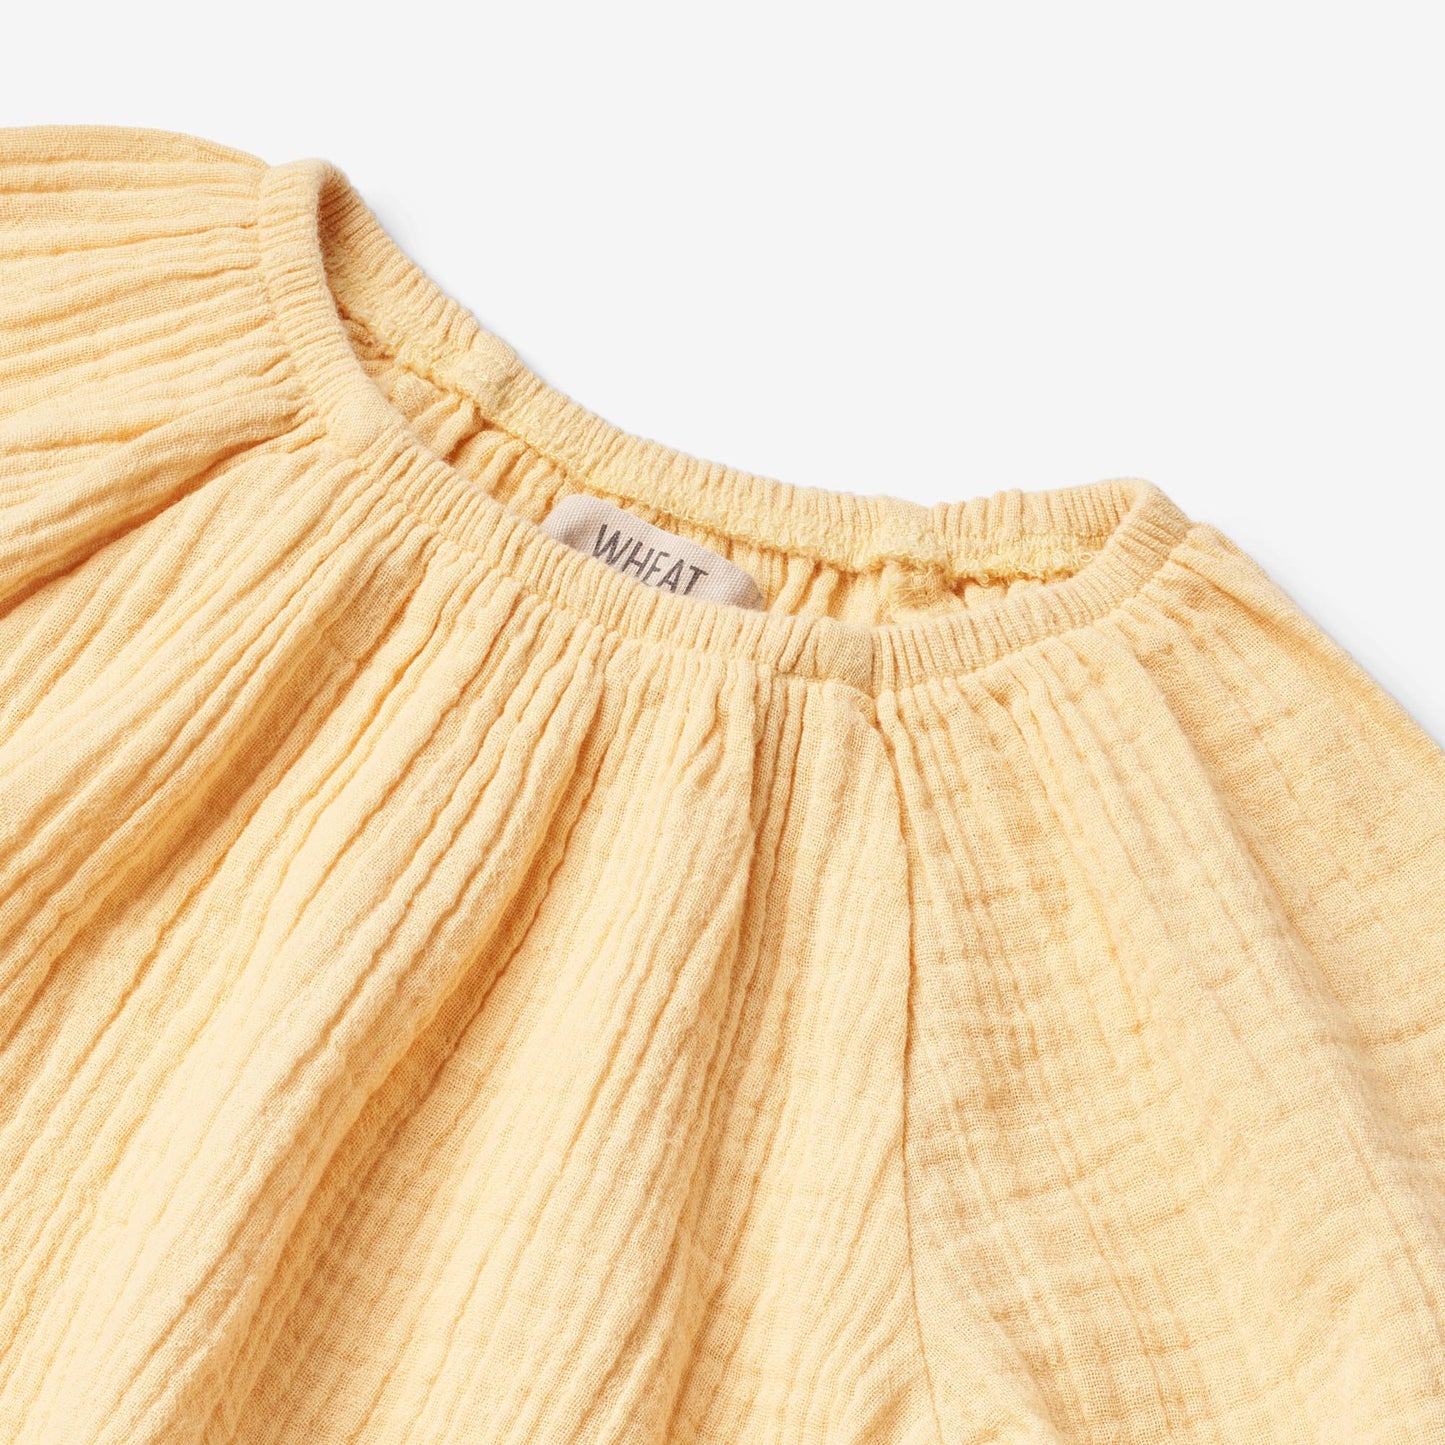 Wheat 'Merle' Baby Blouse - Pale Apricot